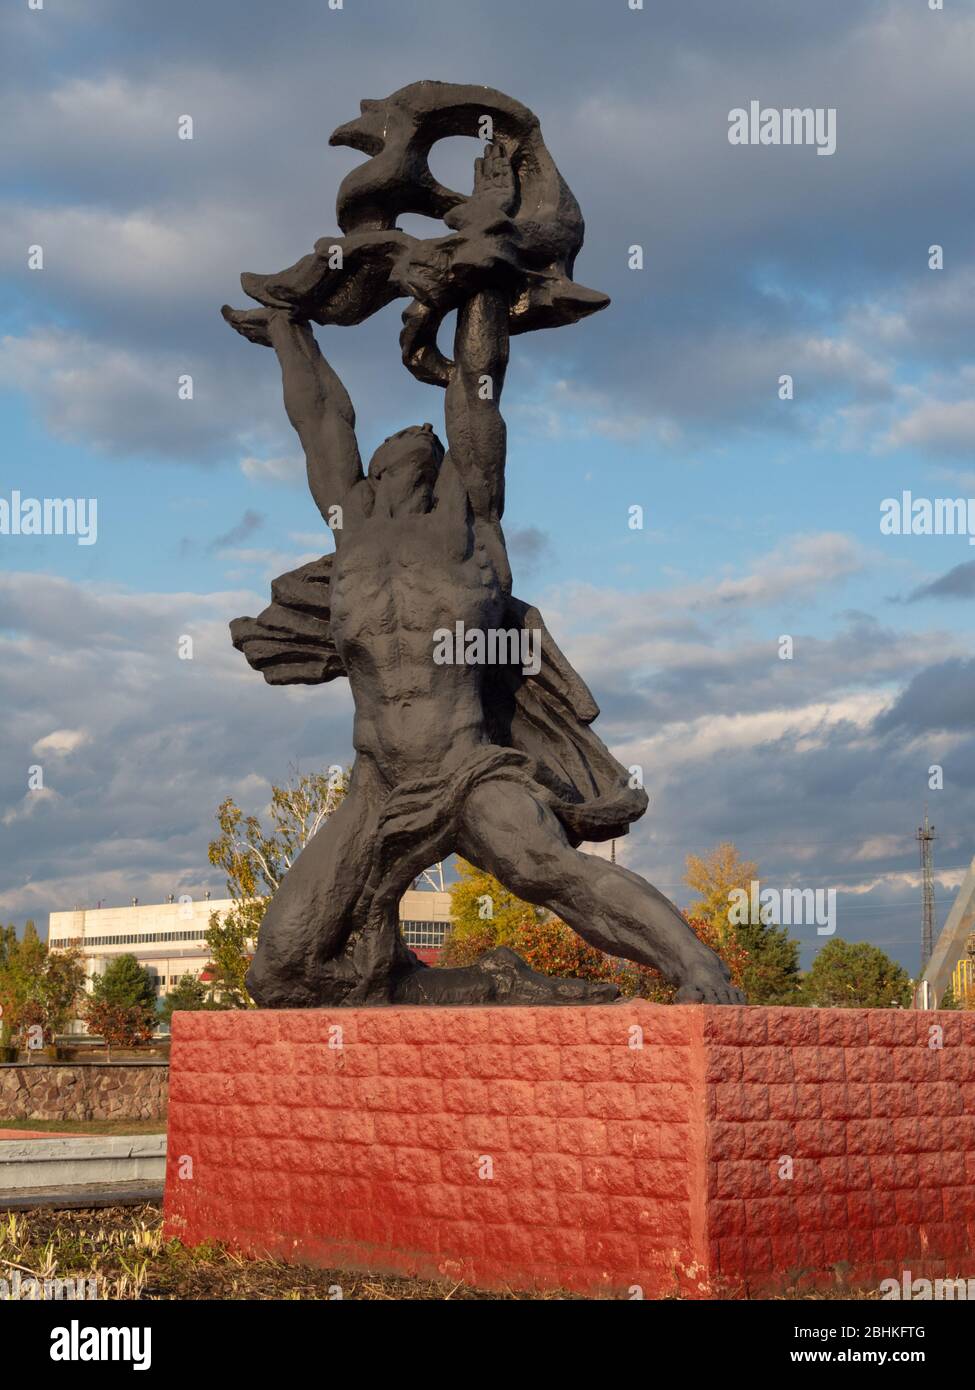 Chernobyl/Ukraine - 11/10/2019. Eastern Europe, Ukraine, Pripyat, Chernobyl. A sculpture of Prometheus titled Taming of the Fire by an unknown artist. Stock Photo